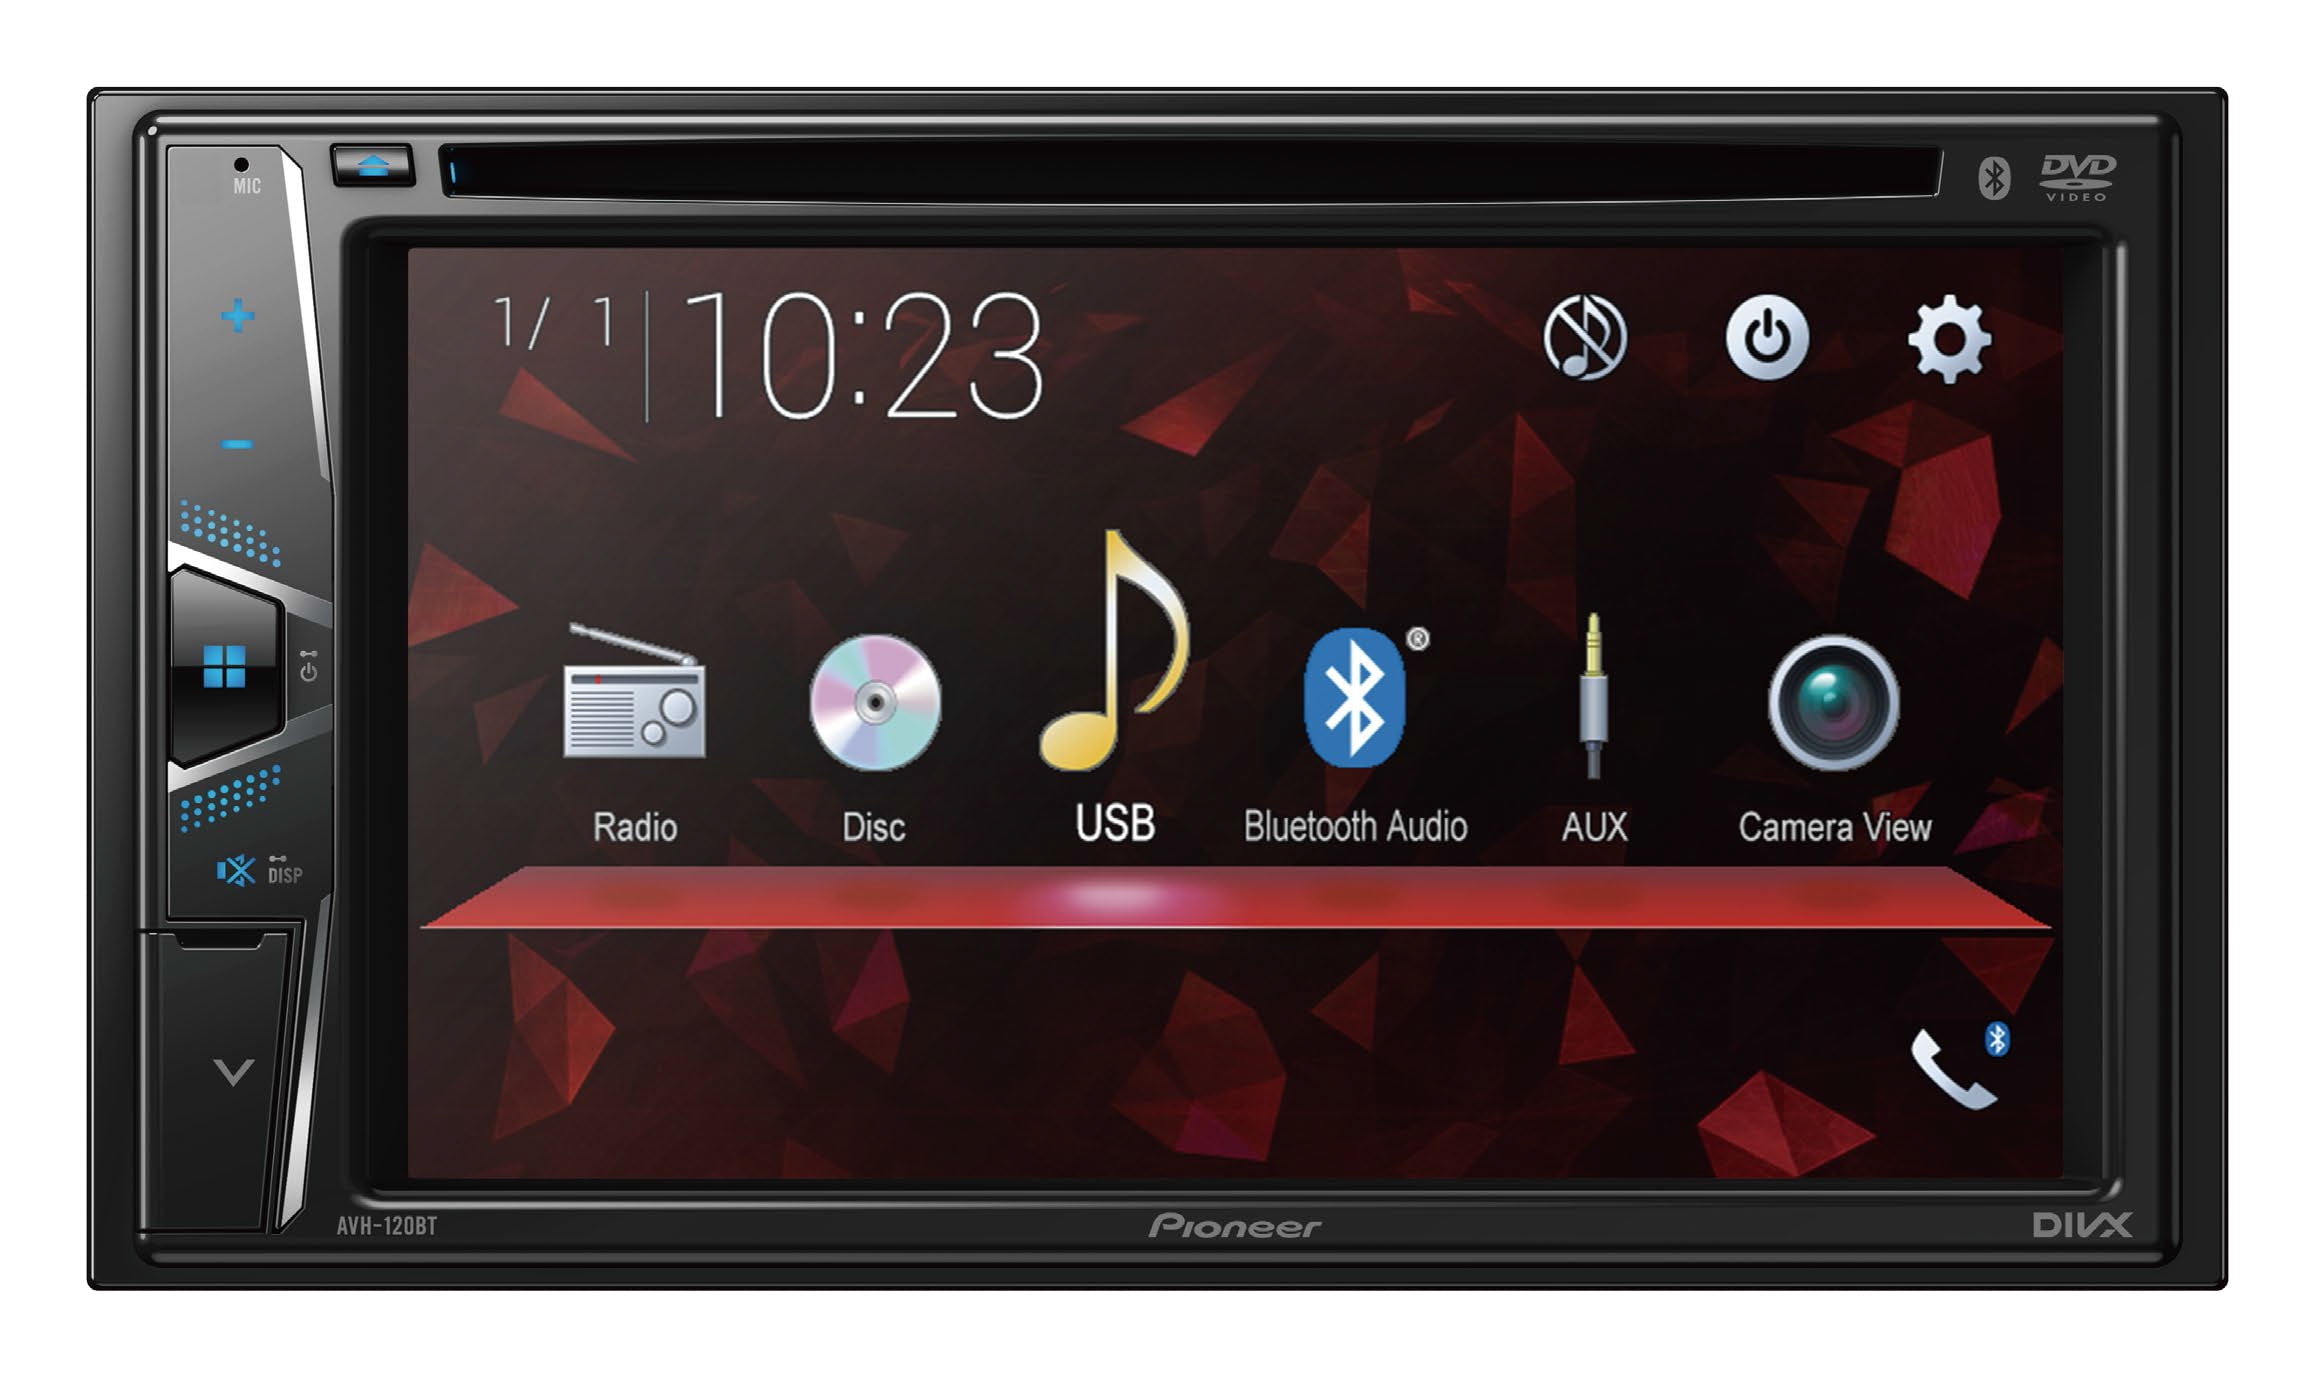 Appearance forum Execution Pioneer AVH-120BT Multimedia Receiver with 6.2 Inch WVGA Touchscreen Display  and Built-in Bluetooth for Hands-free Calling and Audio Playback | Double  DIN | DVD / MP3 / CD Player - Walmart.com